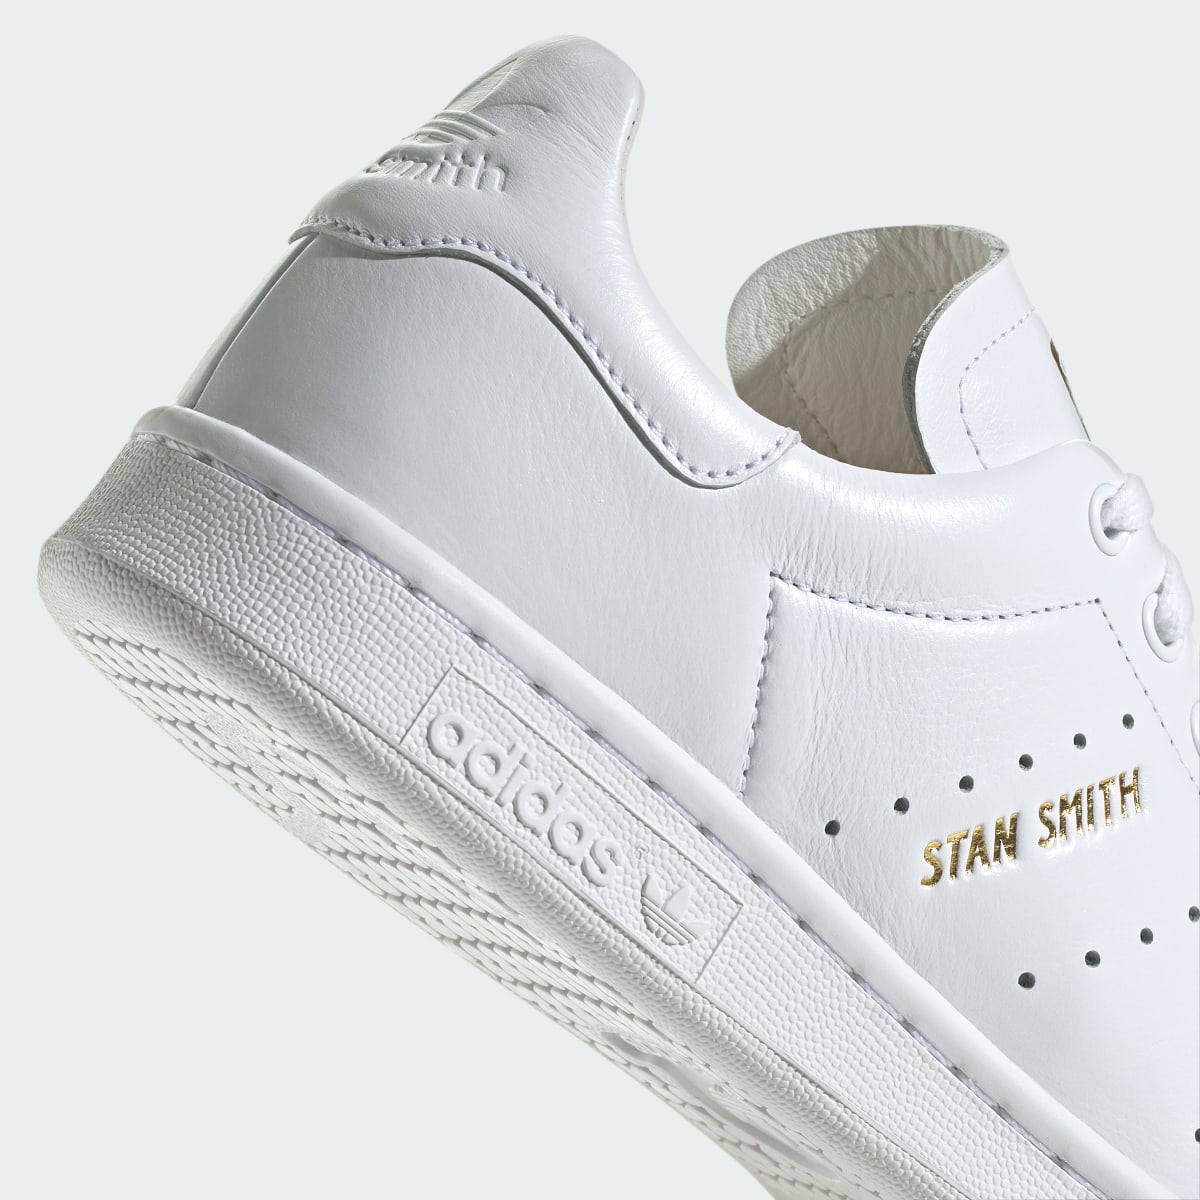 Adidas Stan Smith Lux Shoes. 11